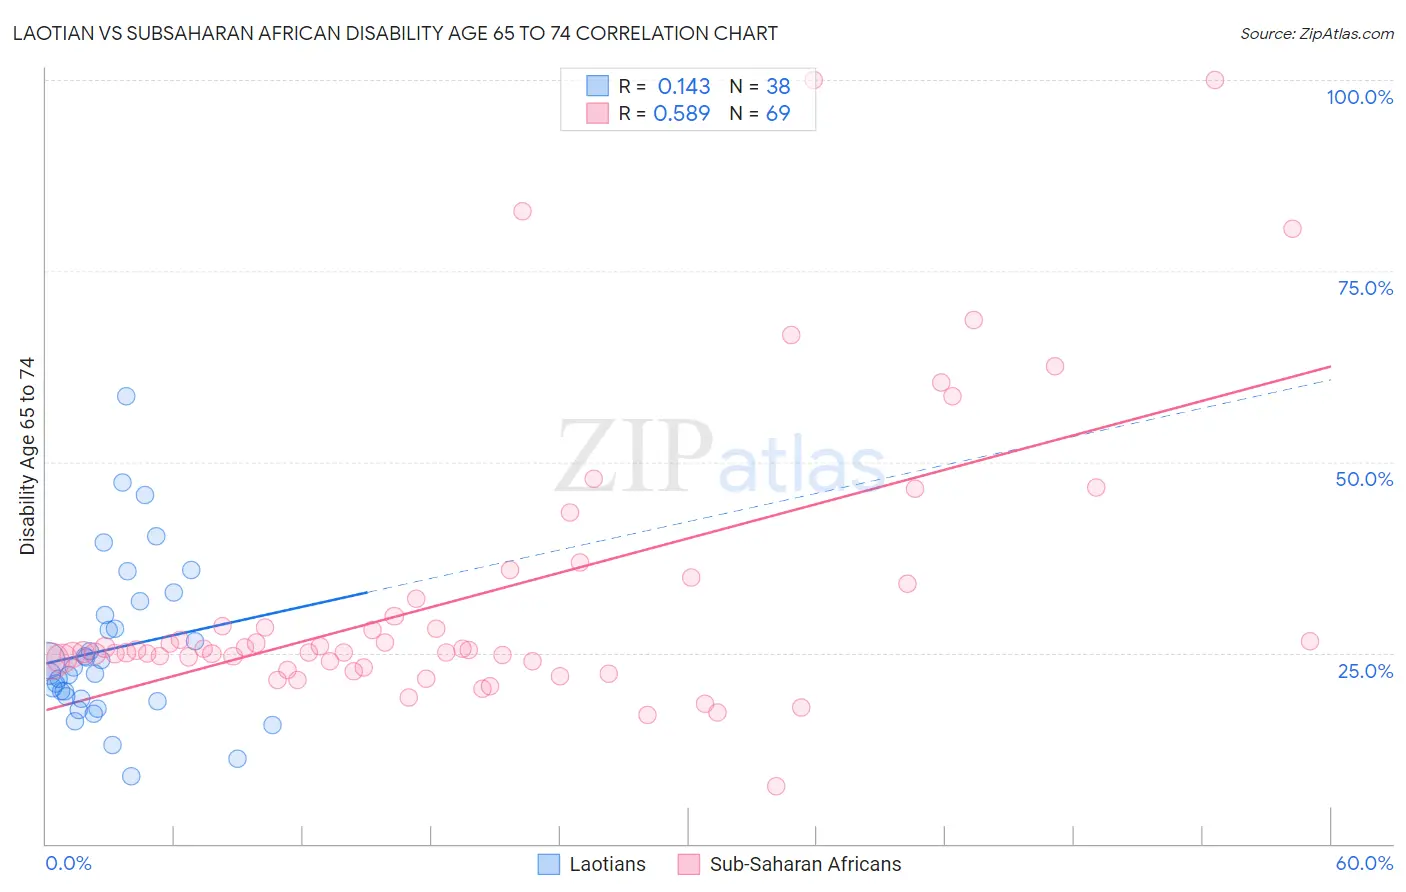 Laotian vs Subsaharan African Disability Age 65 to 74